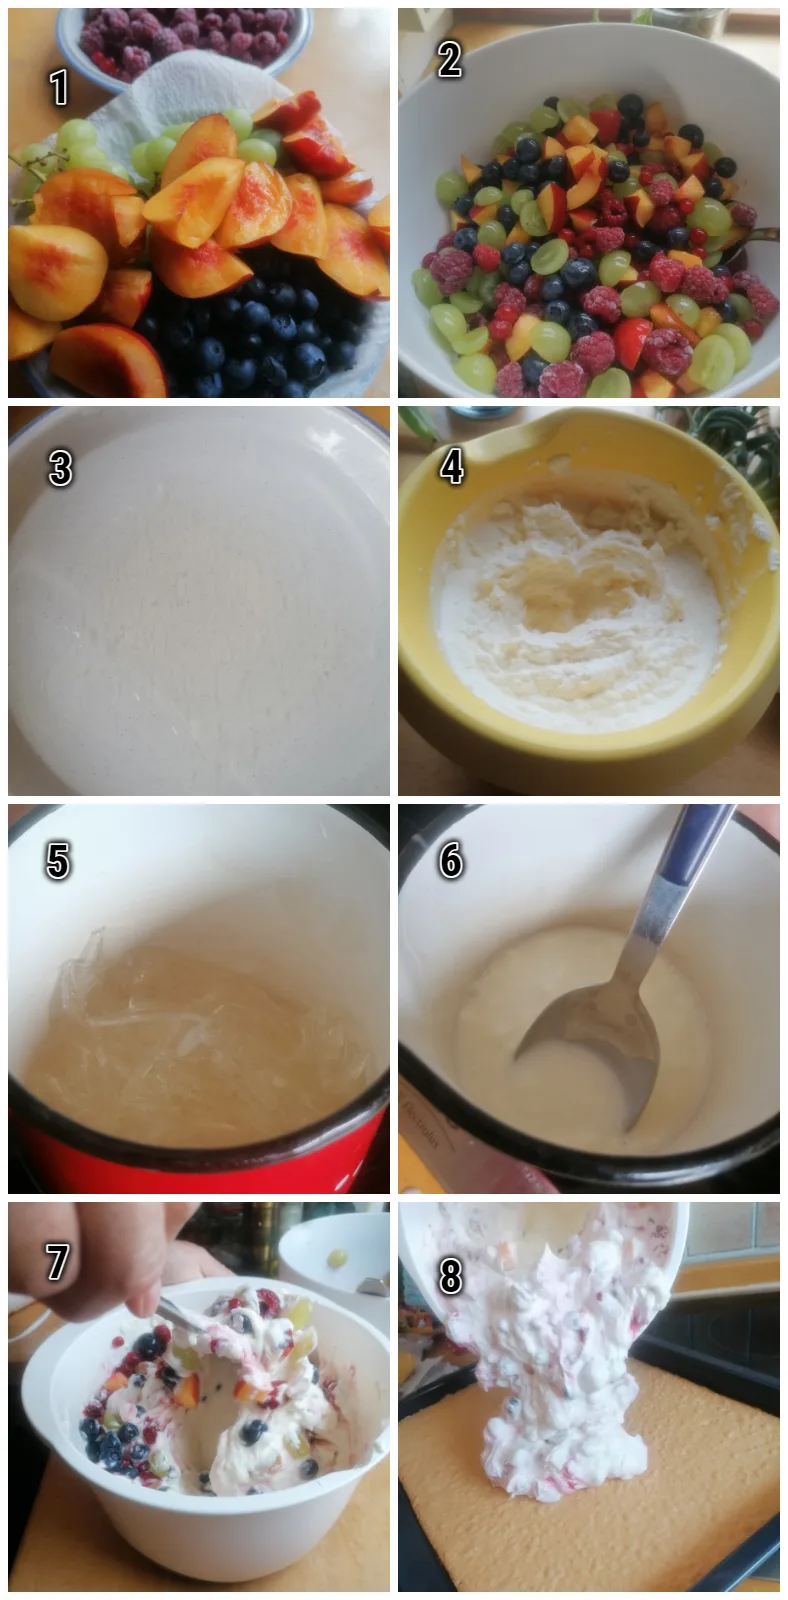 Step-by-step image guide: Preparing the Creamy Filling and Spread It on the cooled sponge cake to make German fruit cream cake.